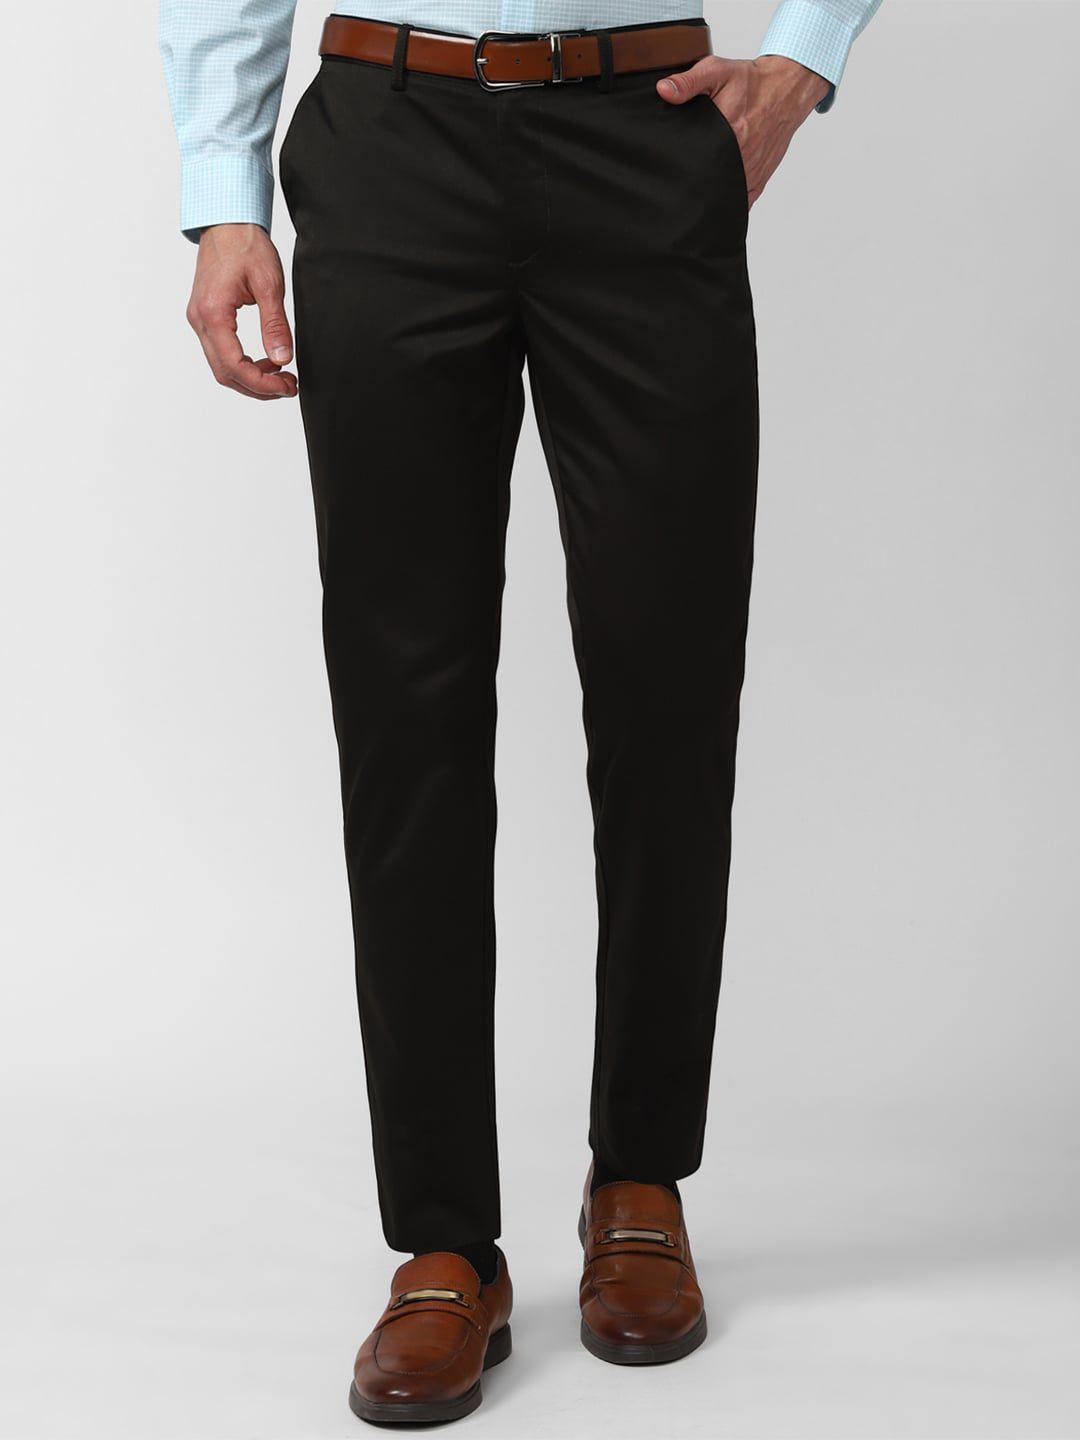 peter england casuals men slim fit trousers